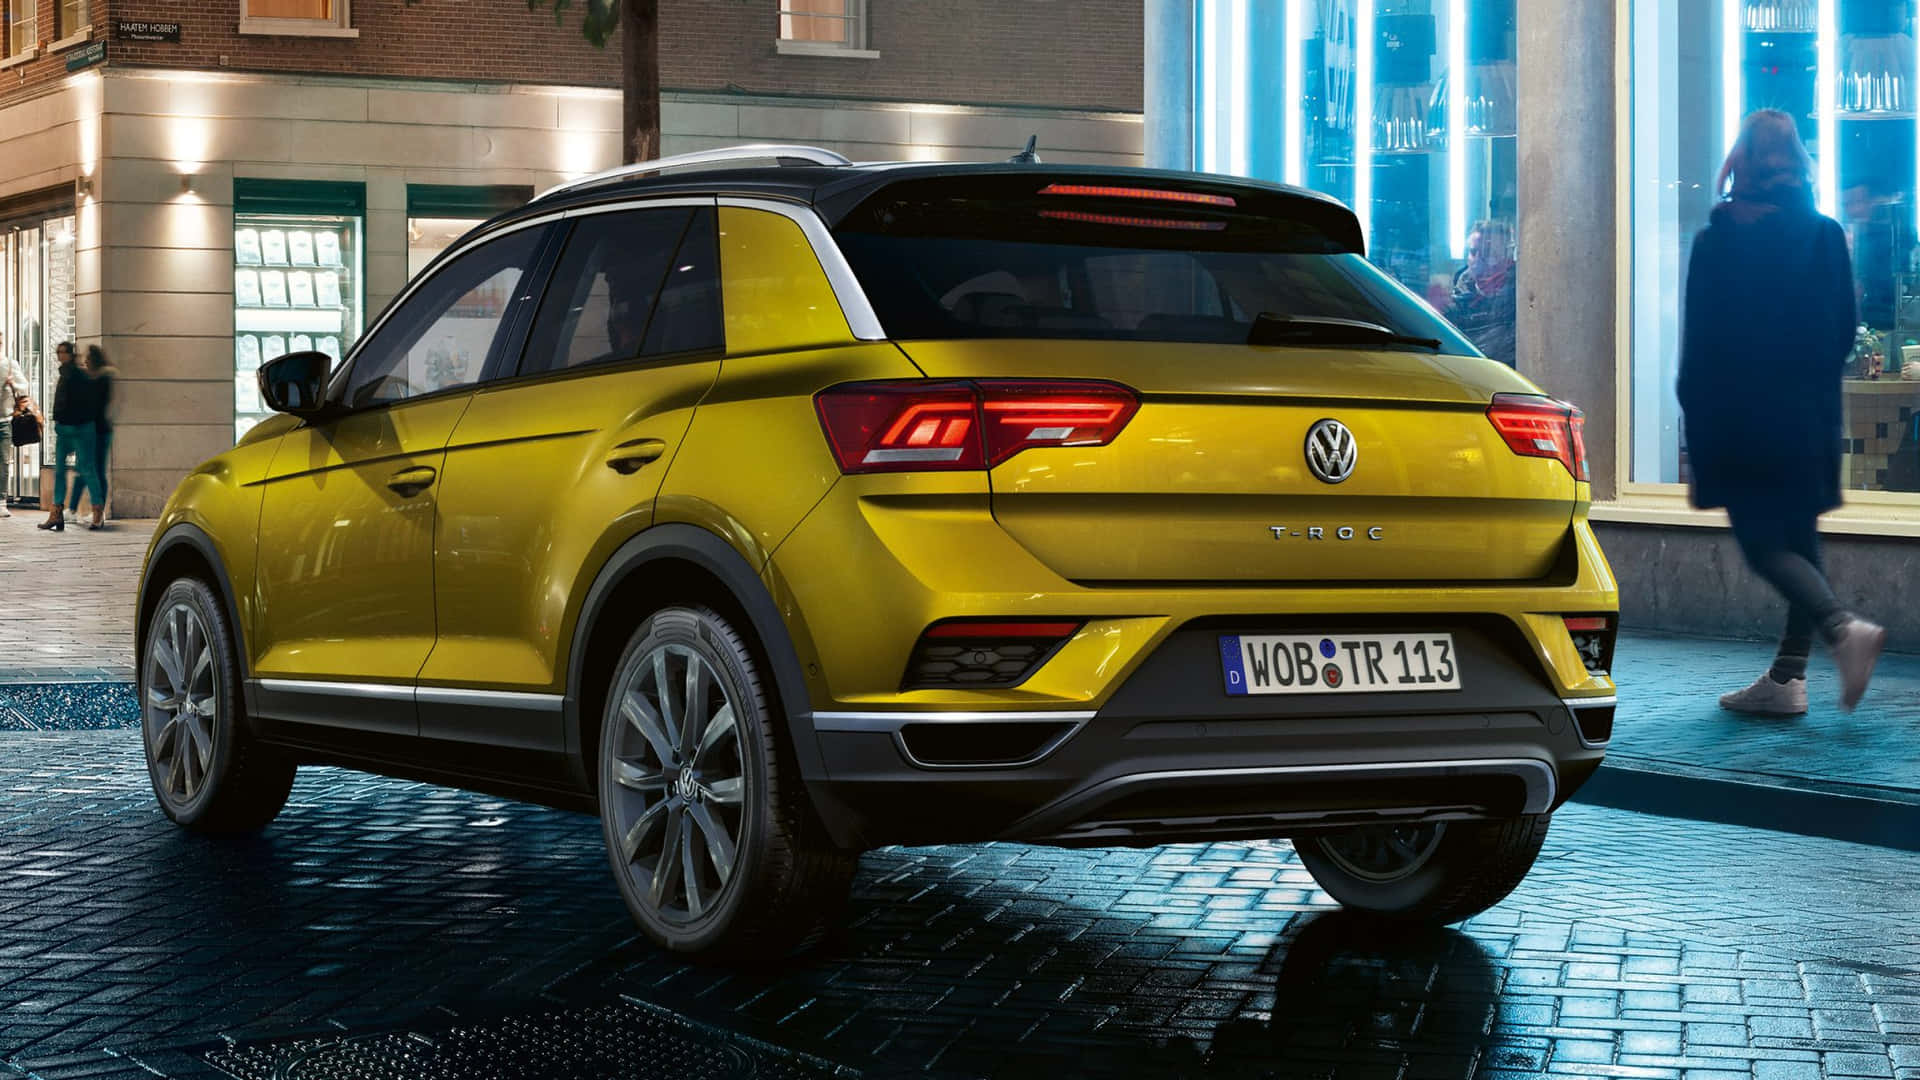 The Stylish And Powerful Volkswagen T-roc On The Move Wallpaper